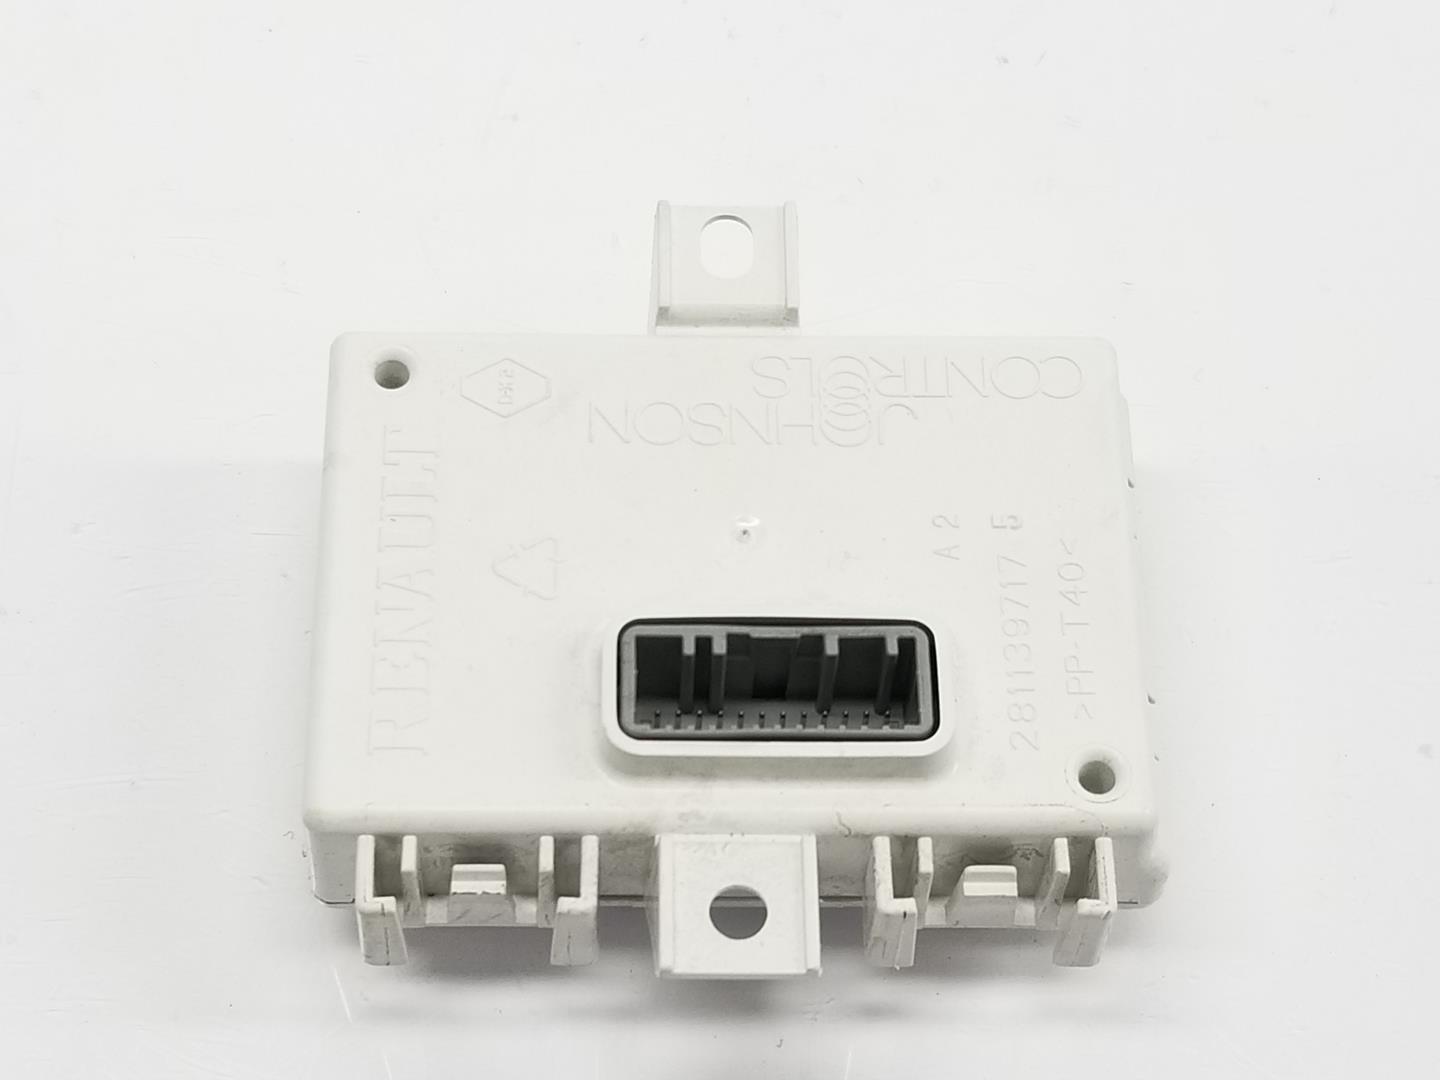 RENAULT Clio 4 generation (2012-2020) Other Control Units 283464084R, 283464084R 20703785